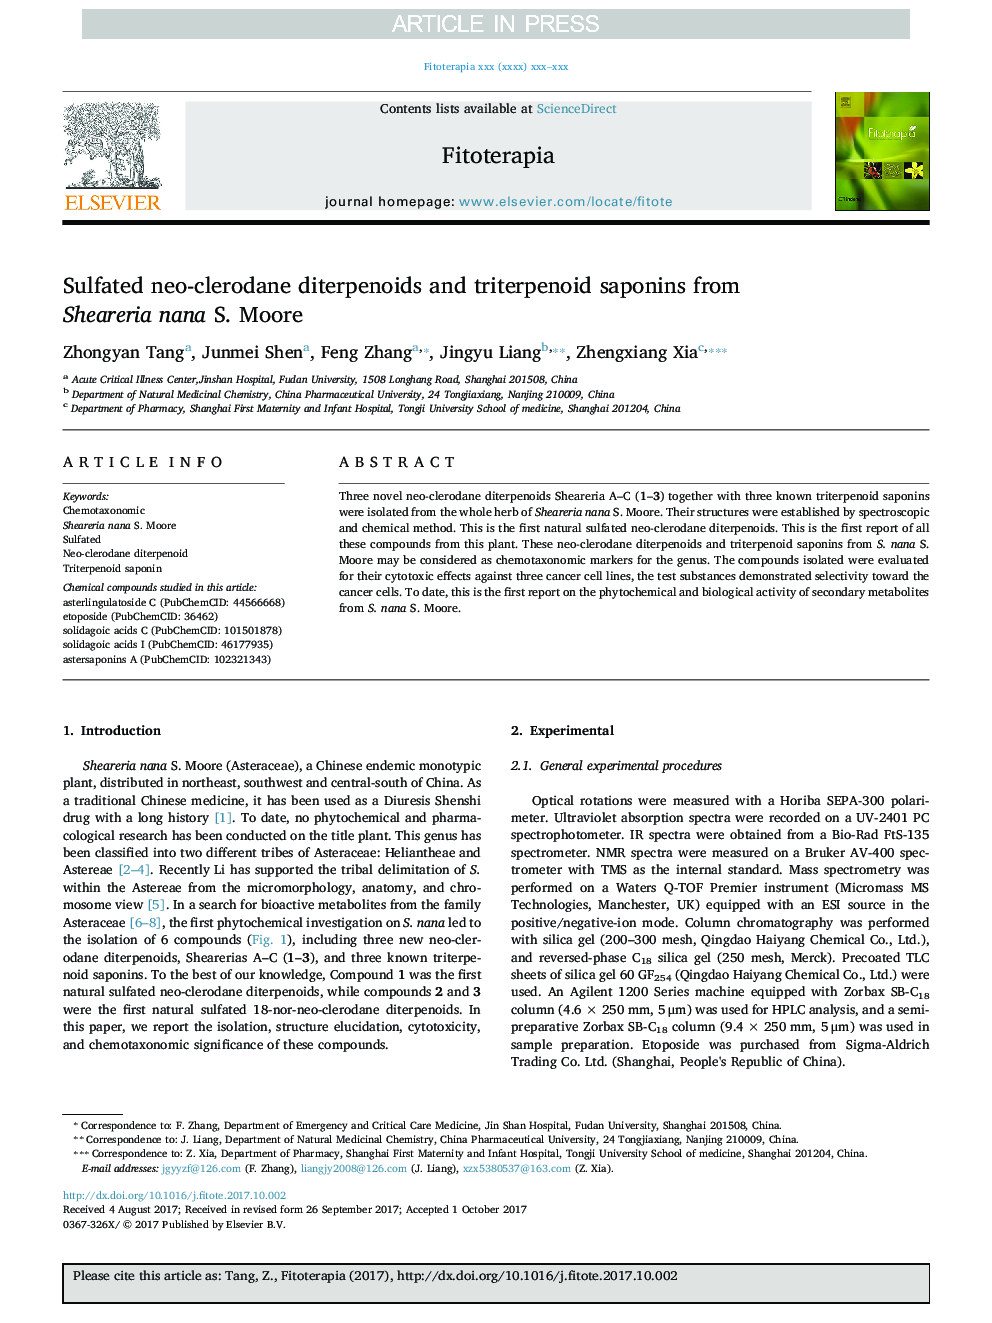 Sulfated neo-clerodane diterpenoids and triterpenoid saponins from Sheareria nana S. Moore